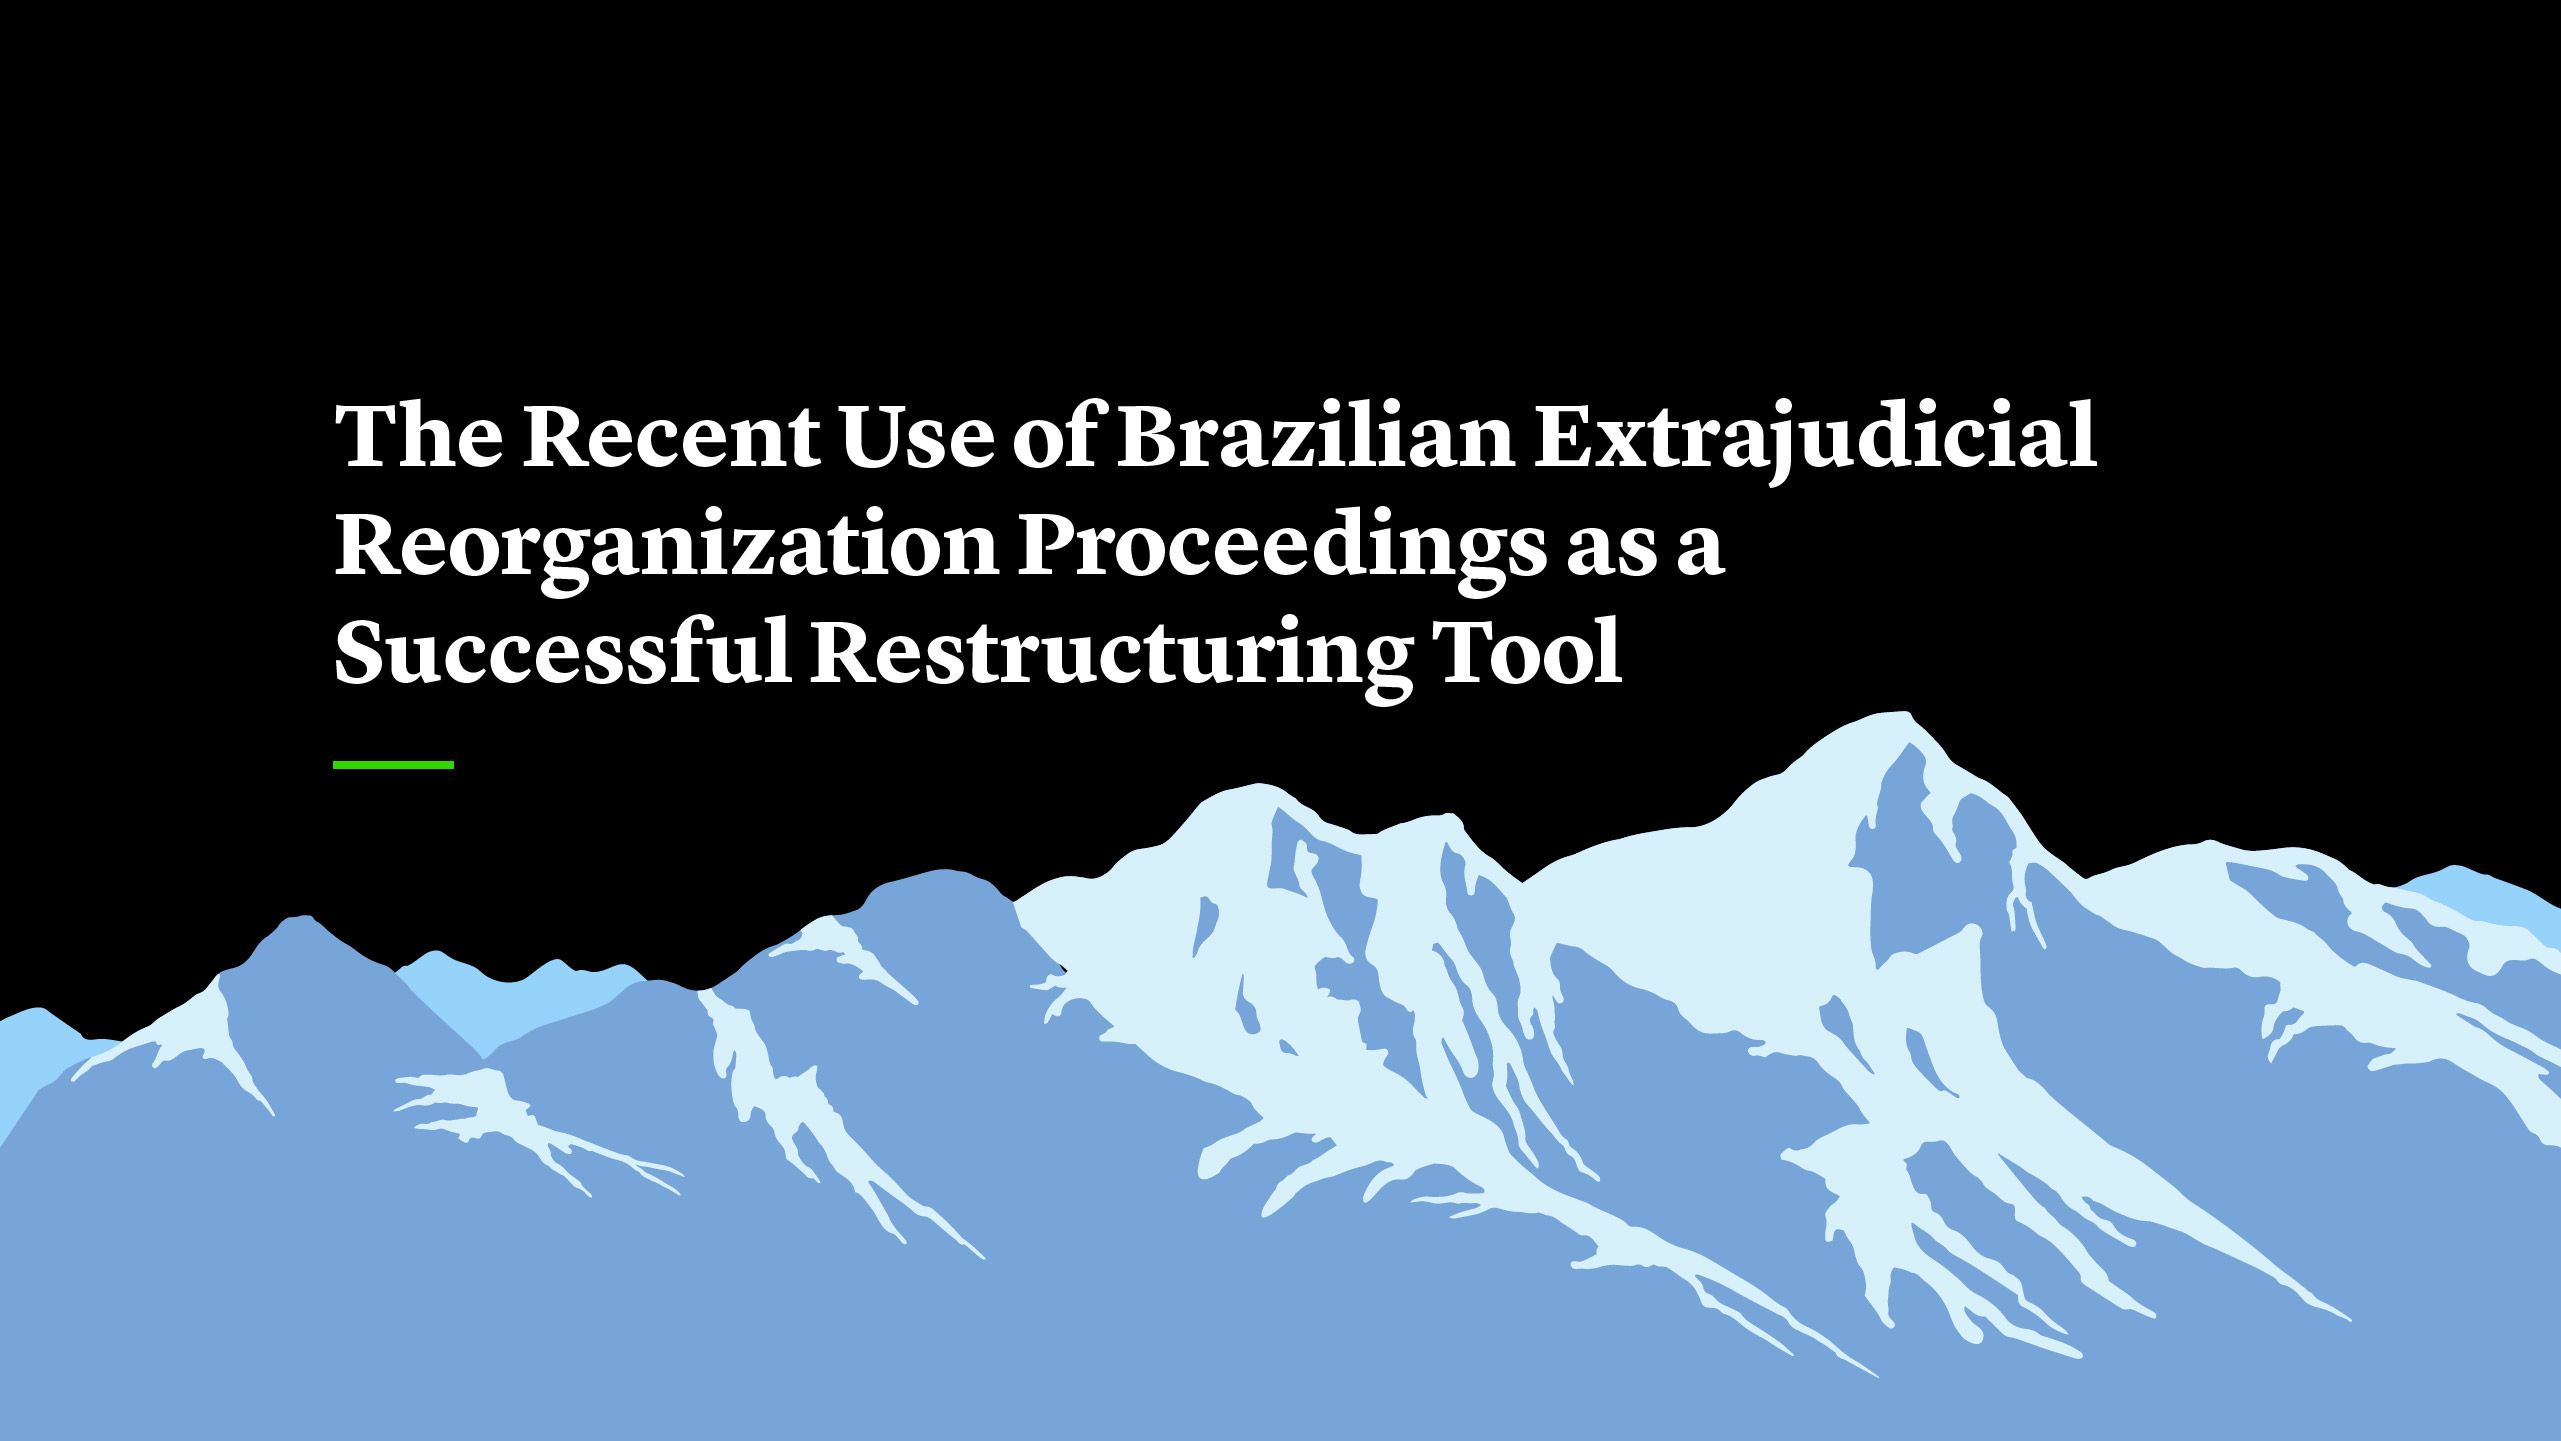 The Recent Use of Brazilian Extrajudicial Reorganization Proceedings as a Successful Restructuring Tool